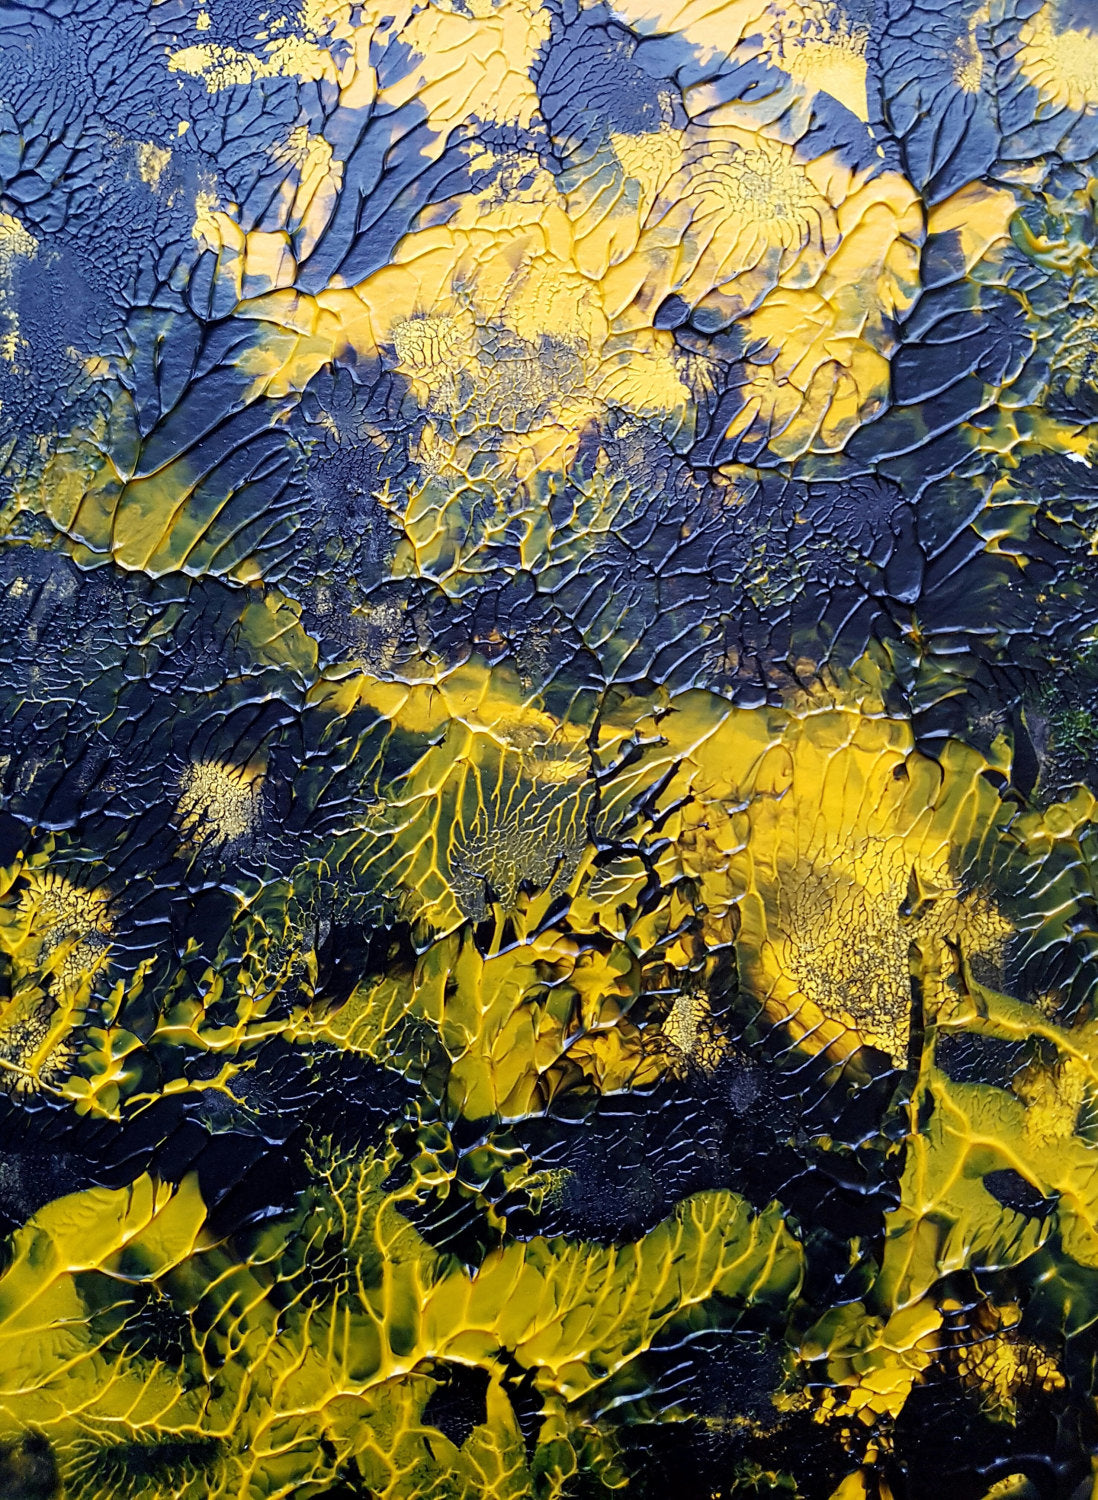 Yellow and Black Abstract Acrylic Painting